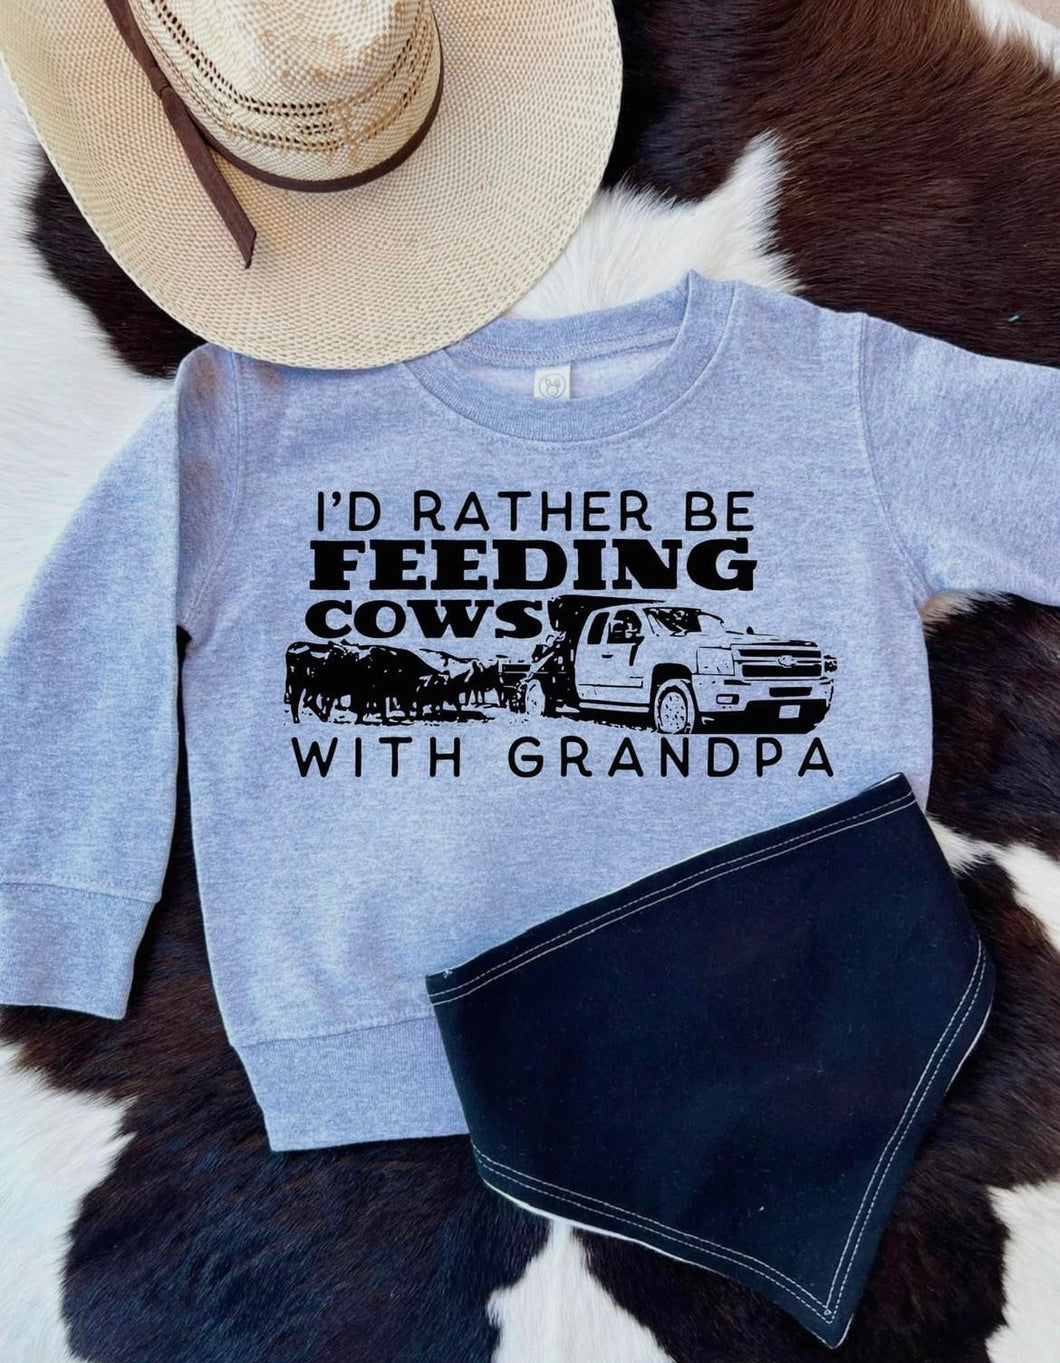 rather feed with grandpa tee